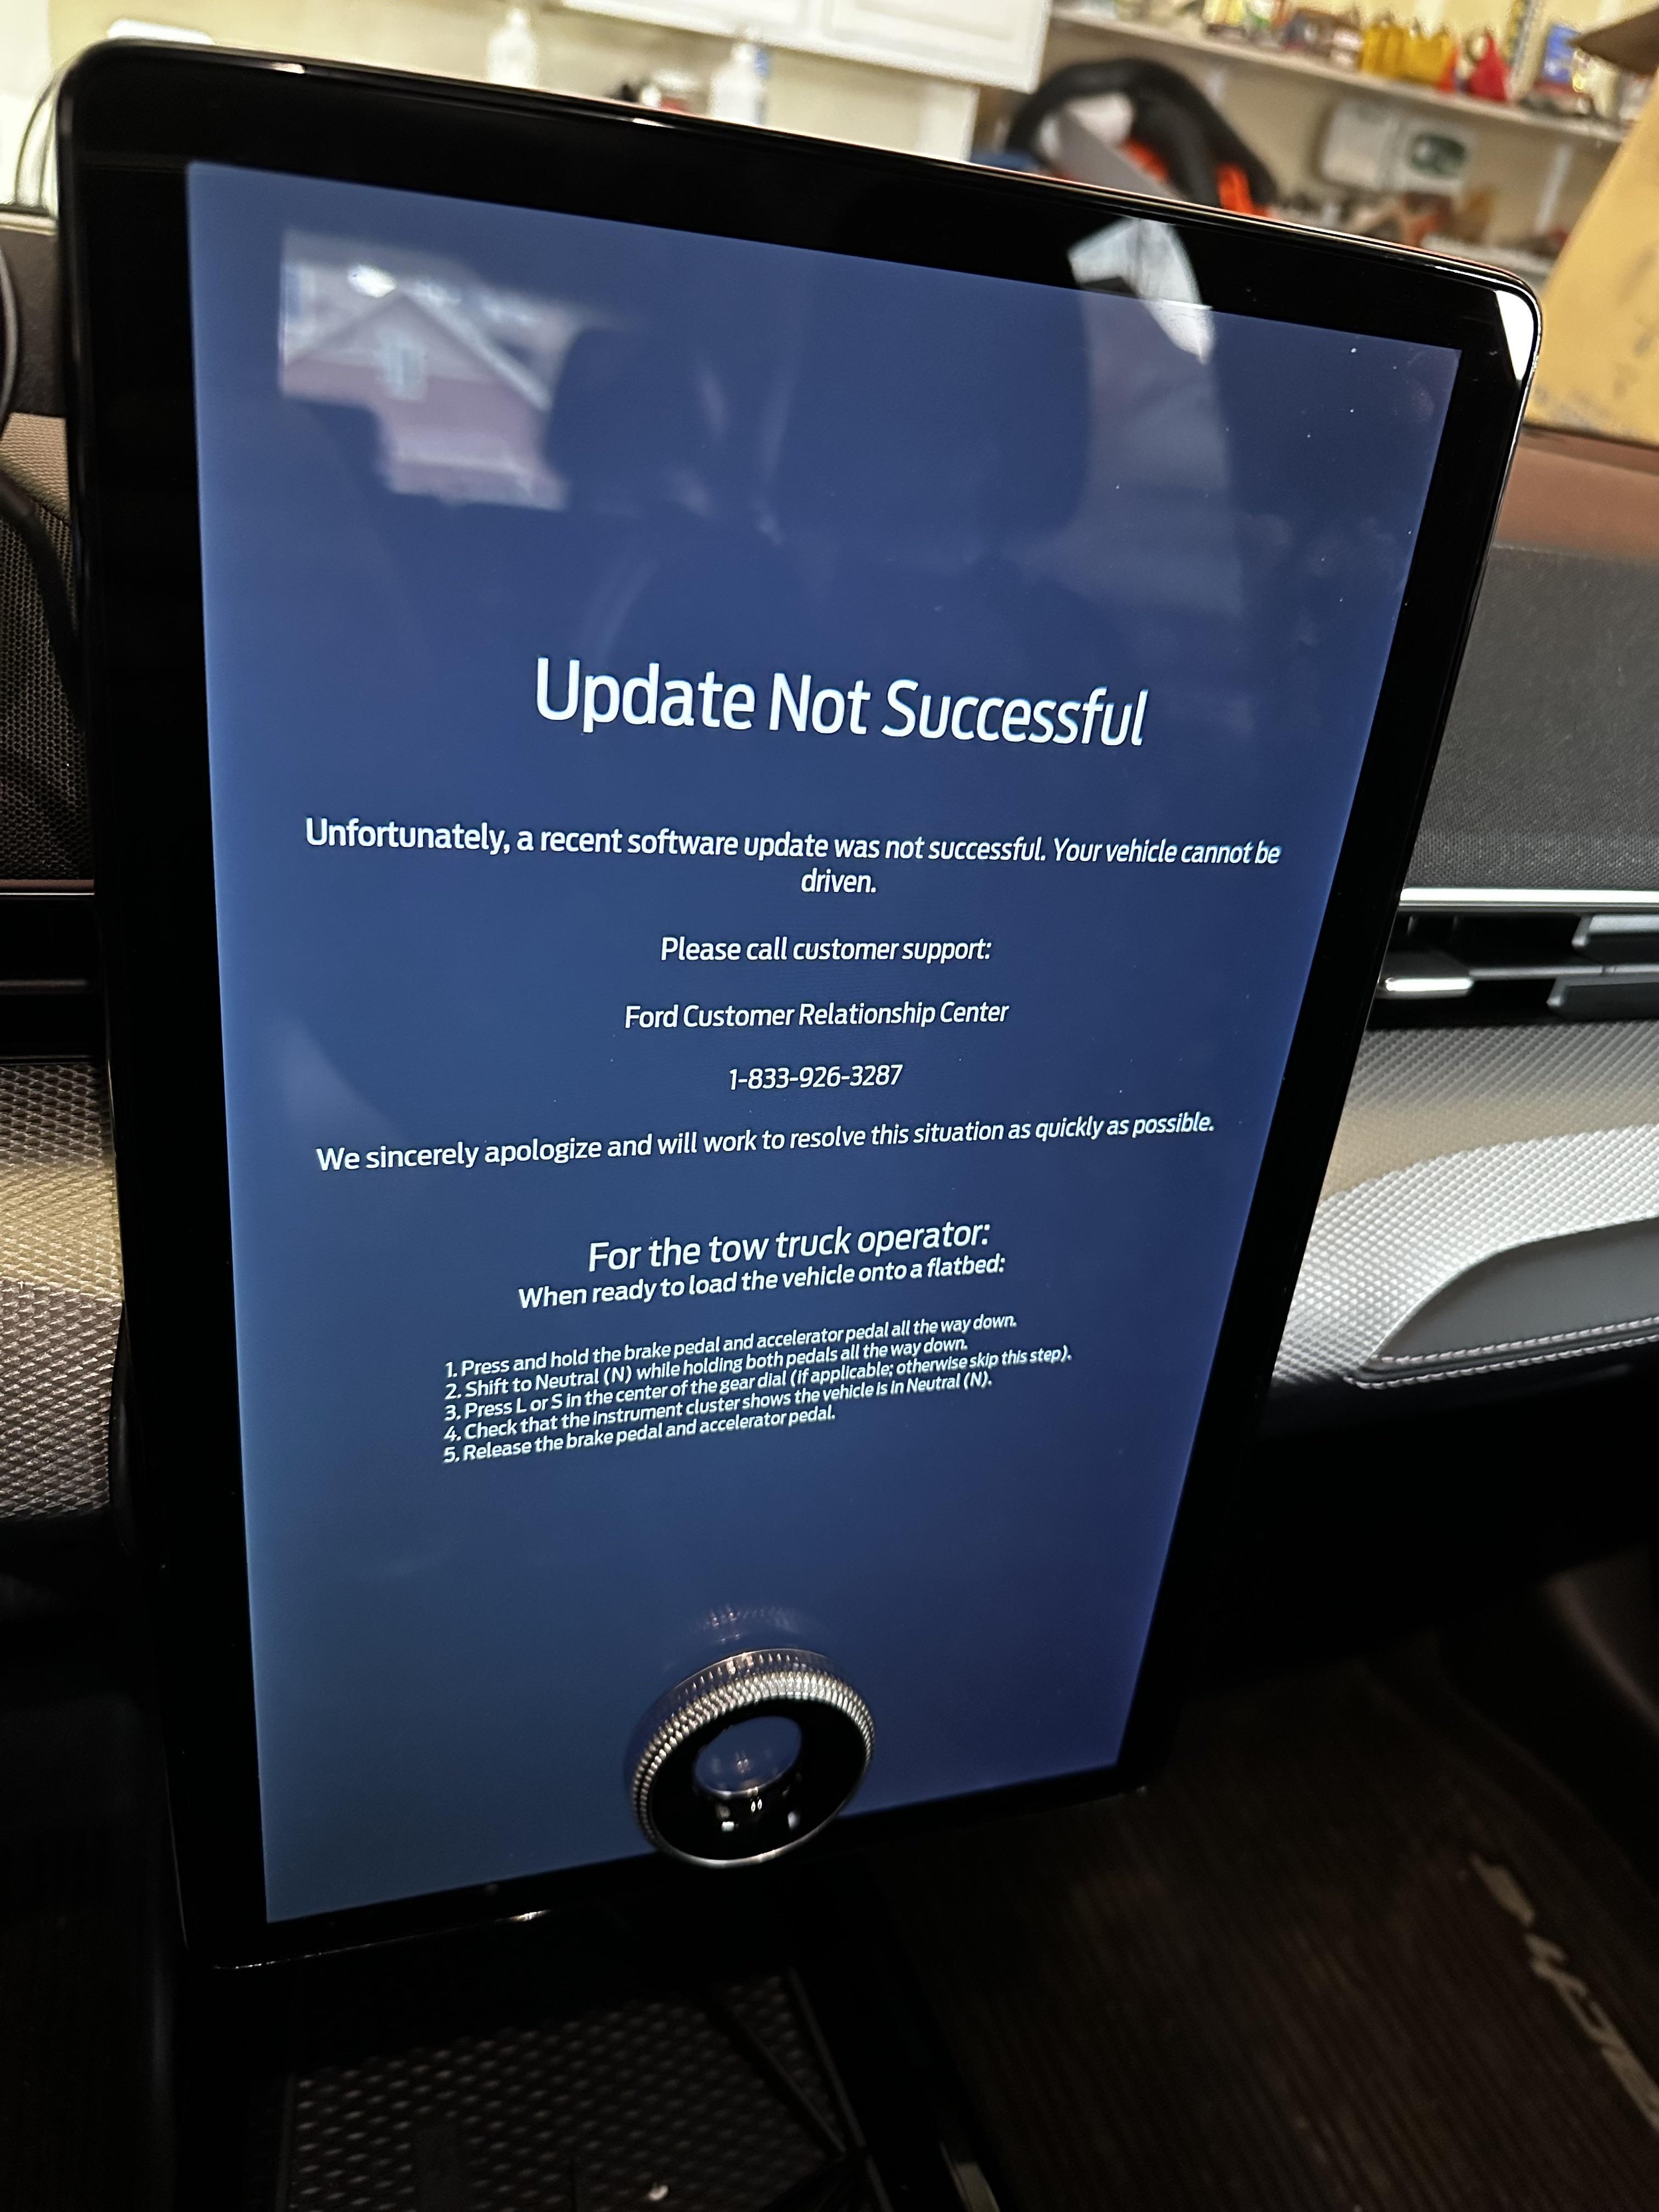 "Unfortunately, a recent software update was not successful. Your vehicle cannot be driven. Please call customer support"